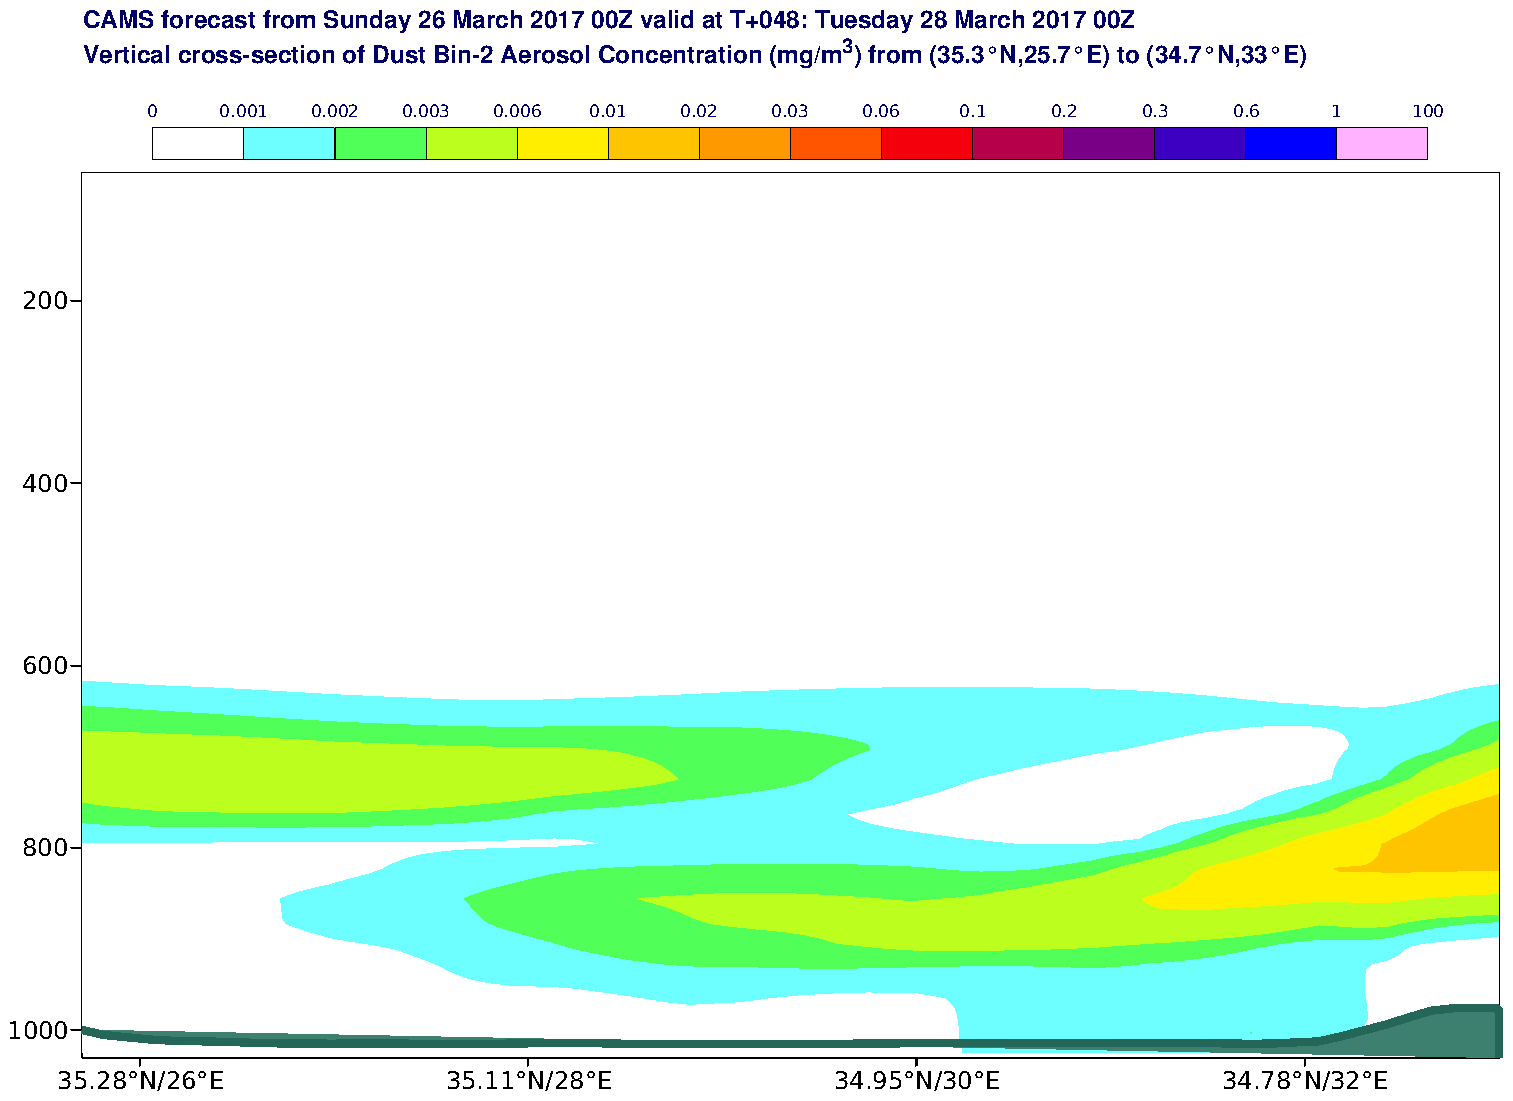 Vertical cross-section of Dust Bin-2 Aerosol Concentration (mg/m3) valid at T48 - 2017-03-28 00:00